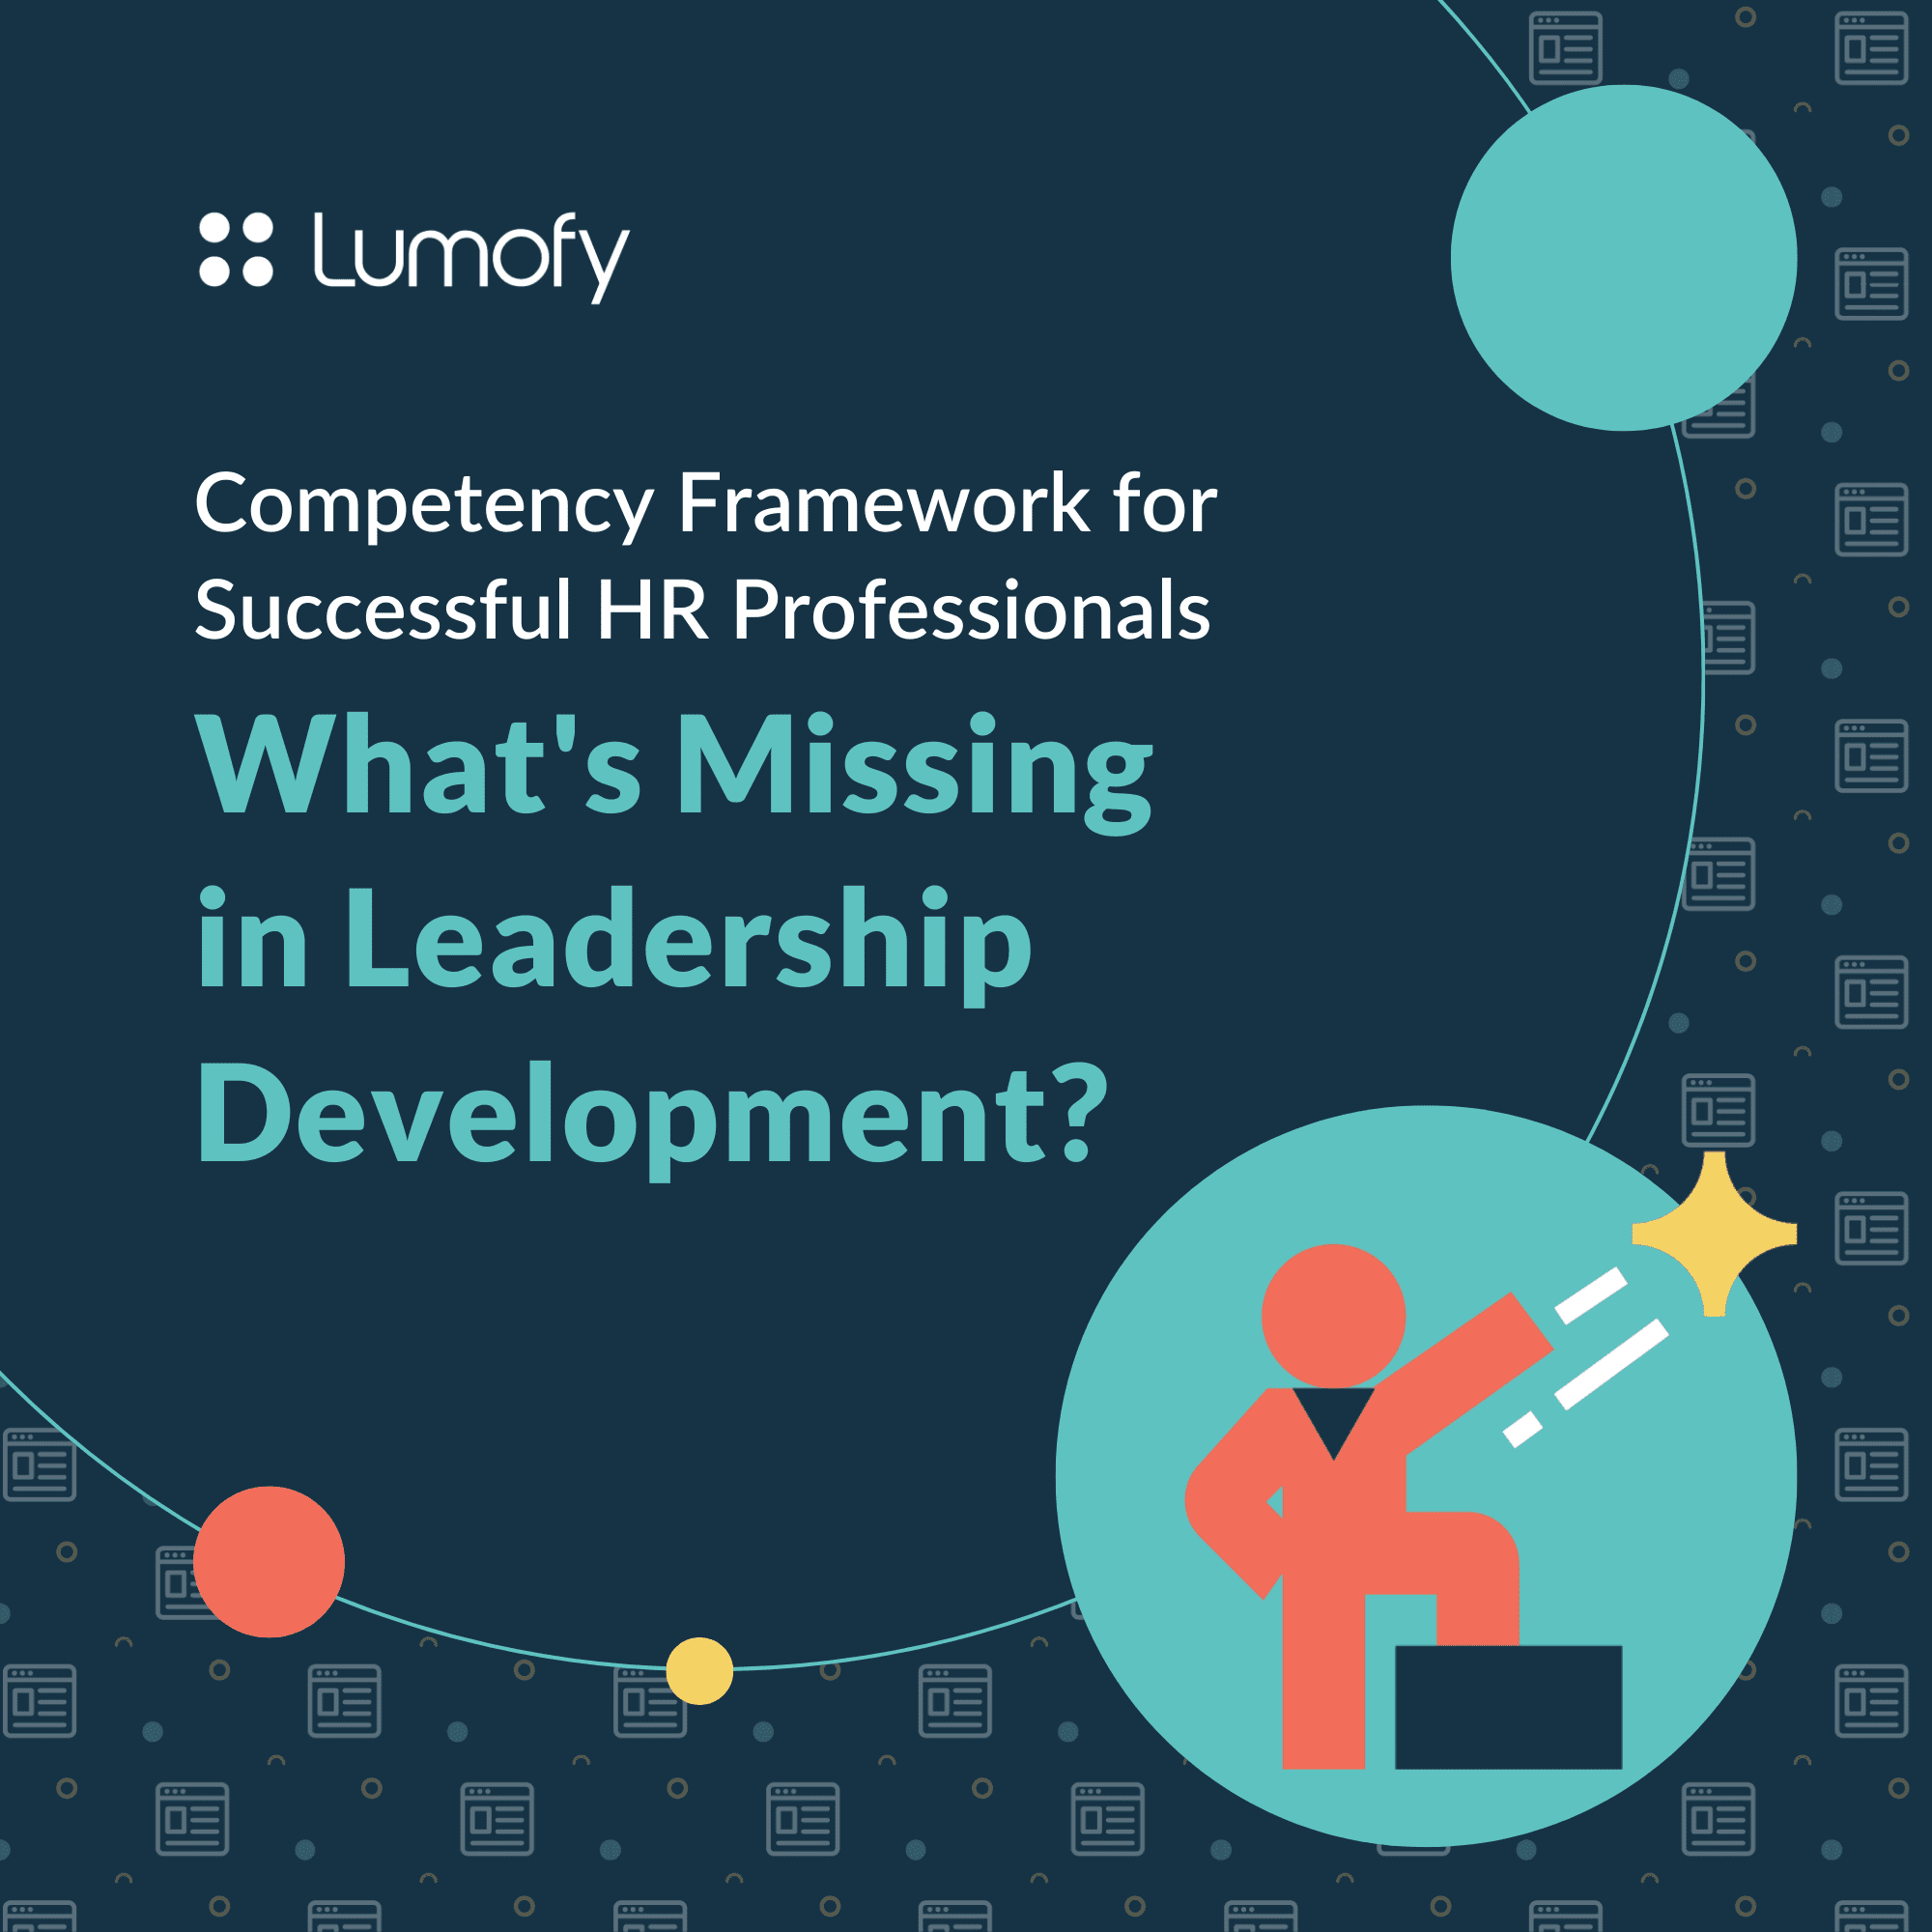 What’s Missing In Leadership Development? Competency Framework For Successful HR Professionals - Leadership development